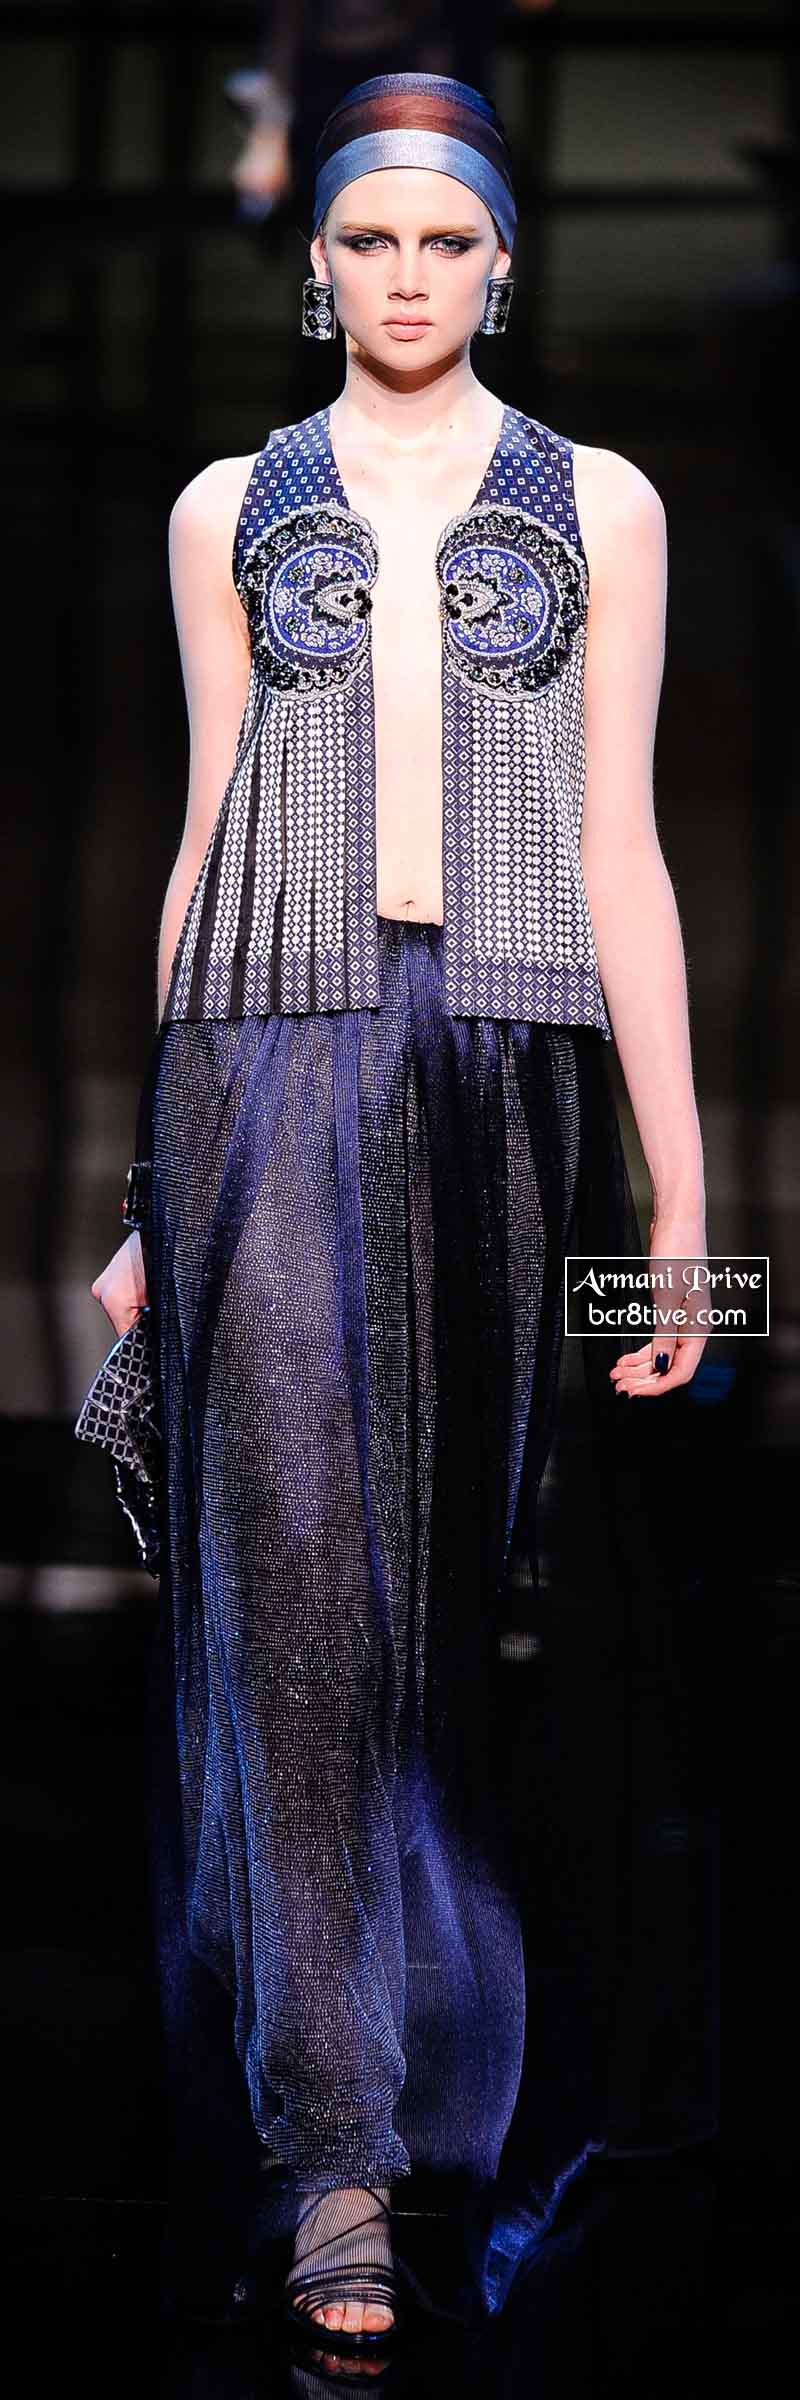 Armani Privé Spring 2014 Couture – Page 3 – Be Creative